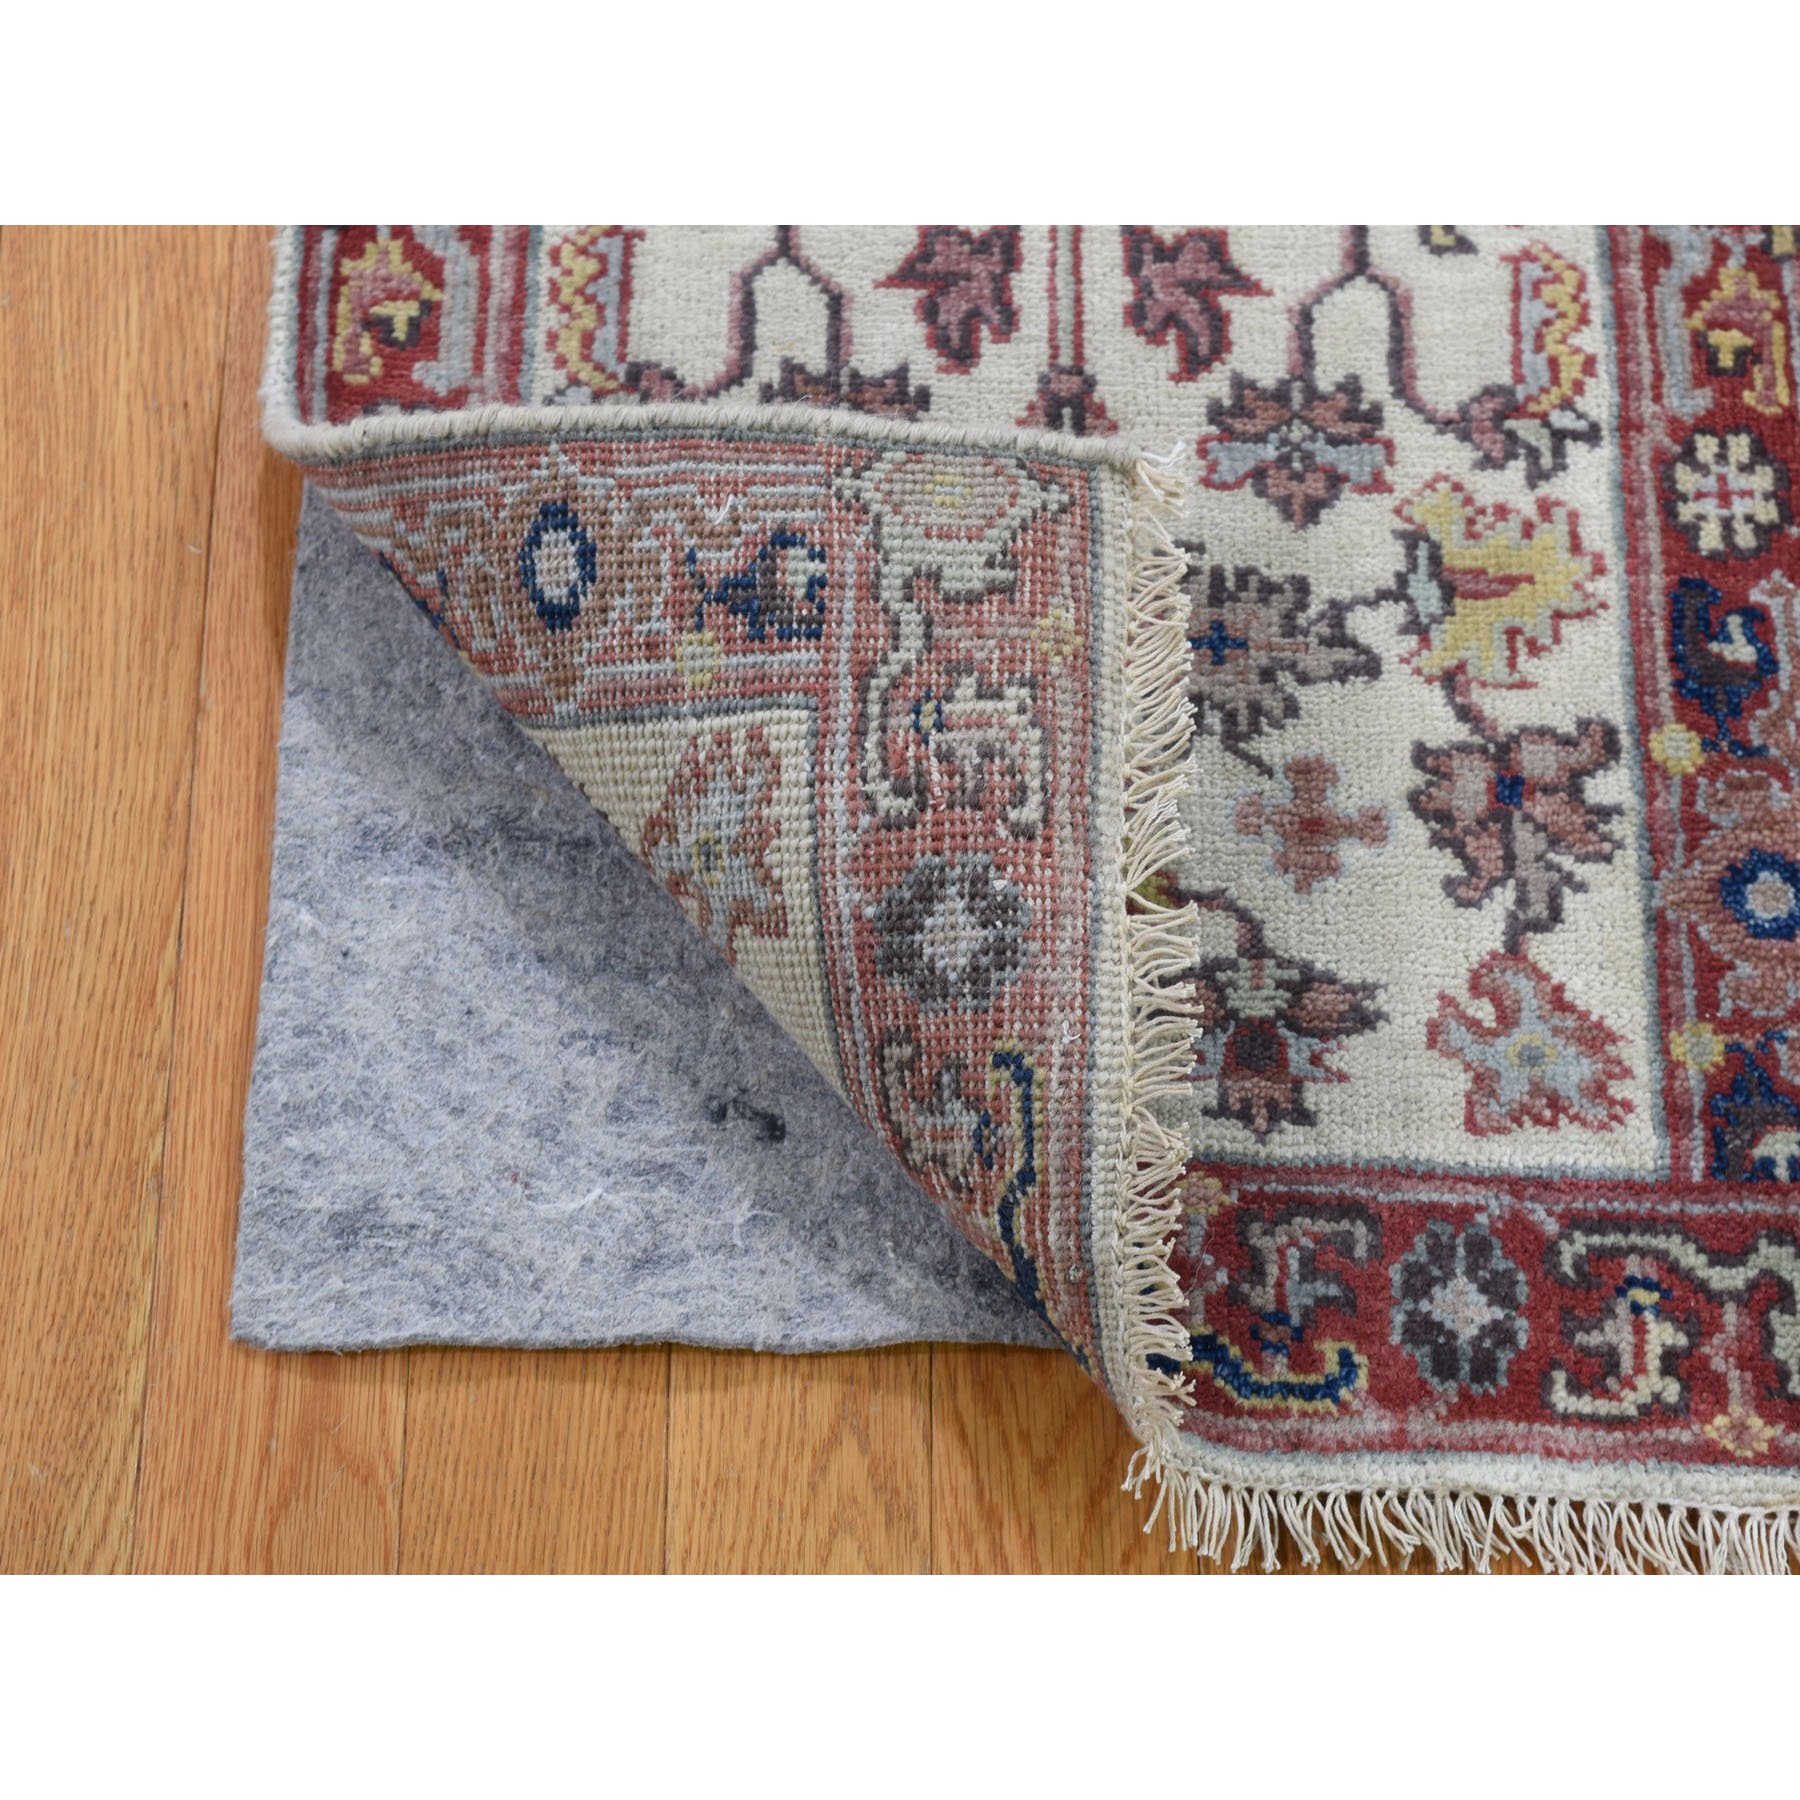 1-10 x3- Ivory Heriz Revival All Over Design Pure Wool Hand-Knotted Oriental Rug 